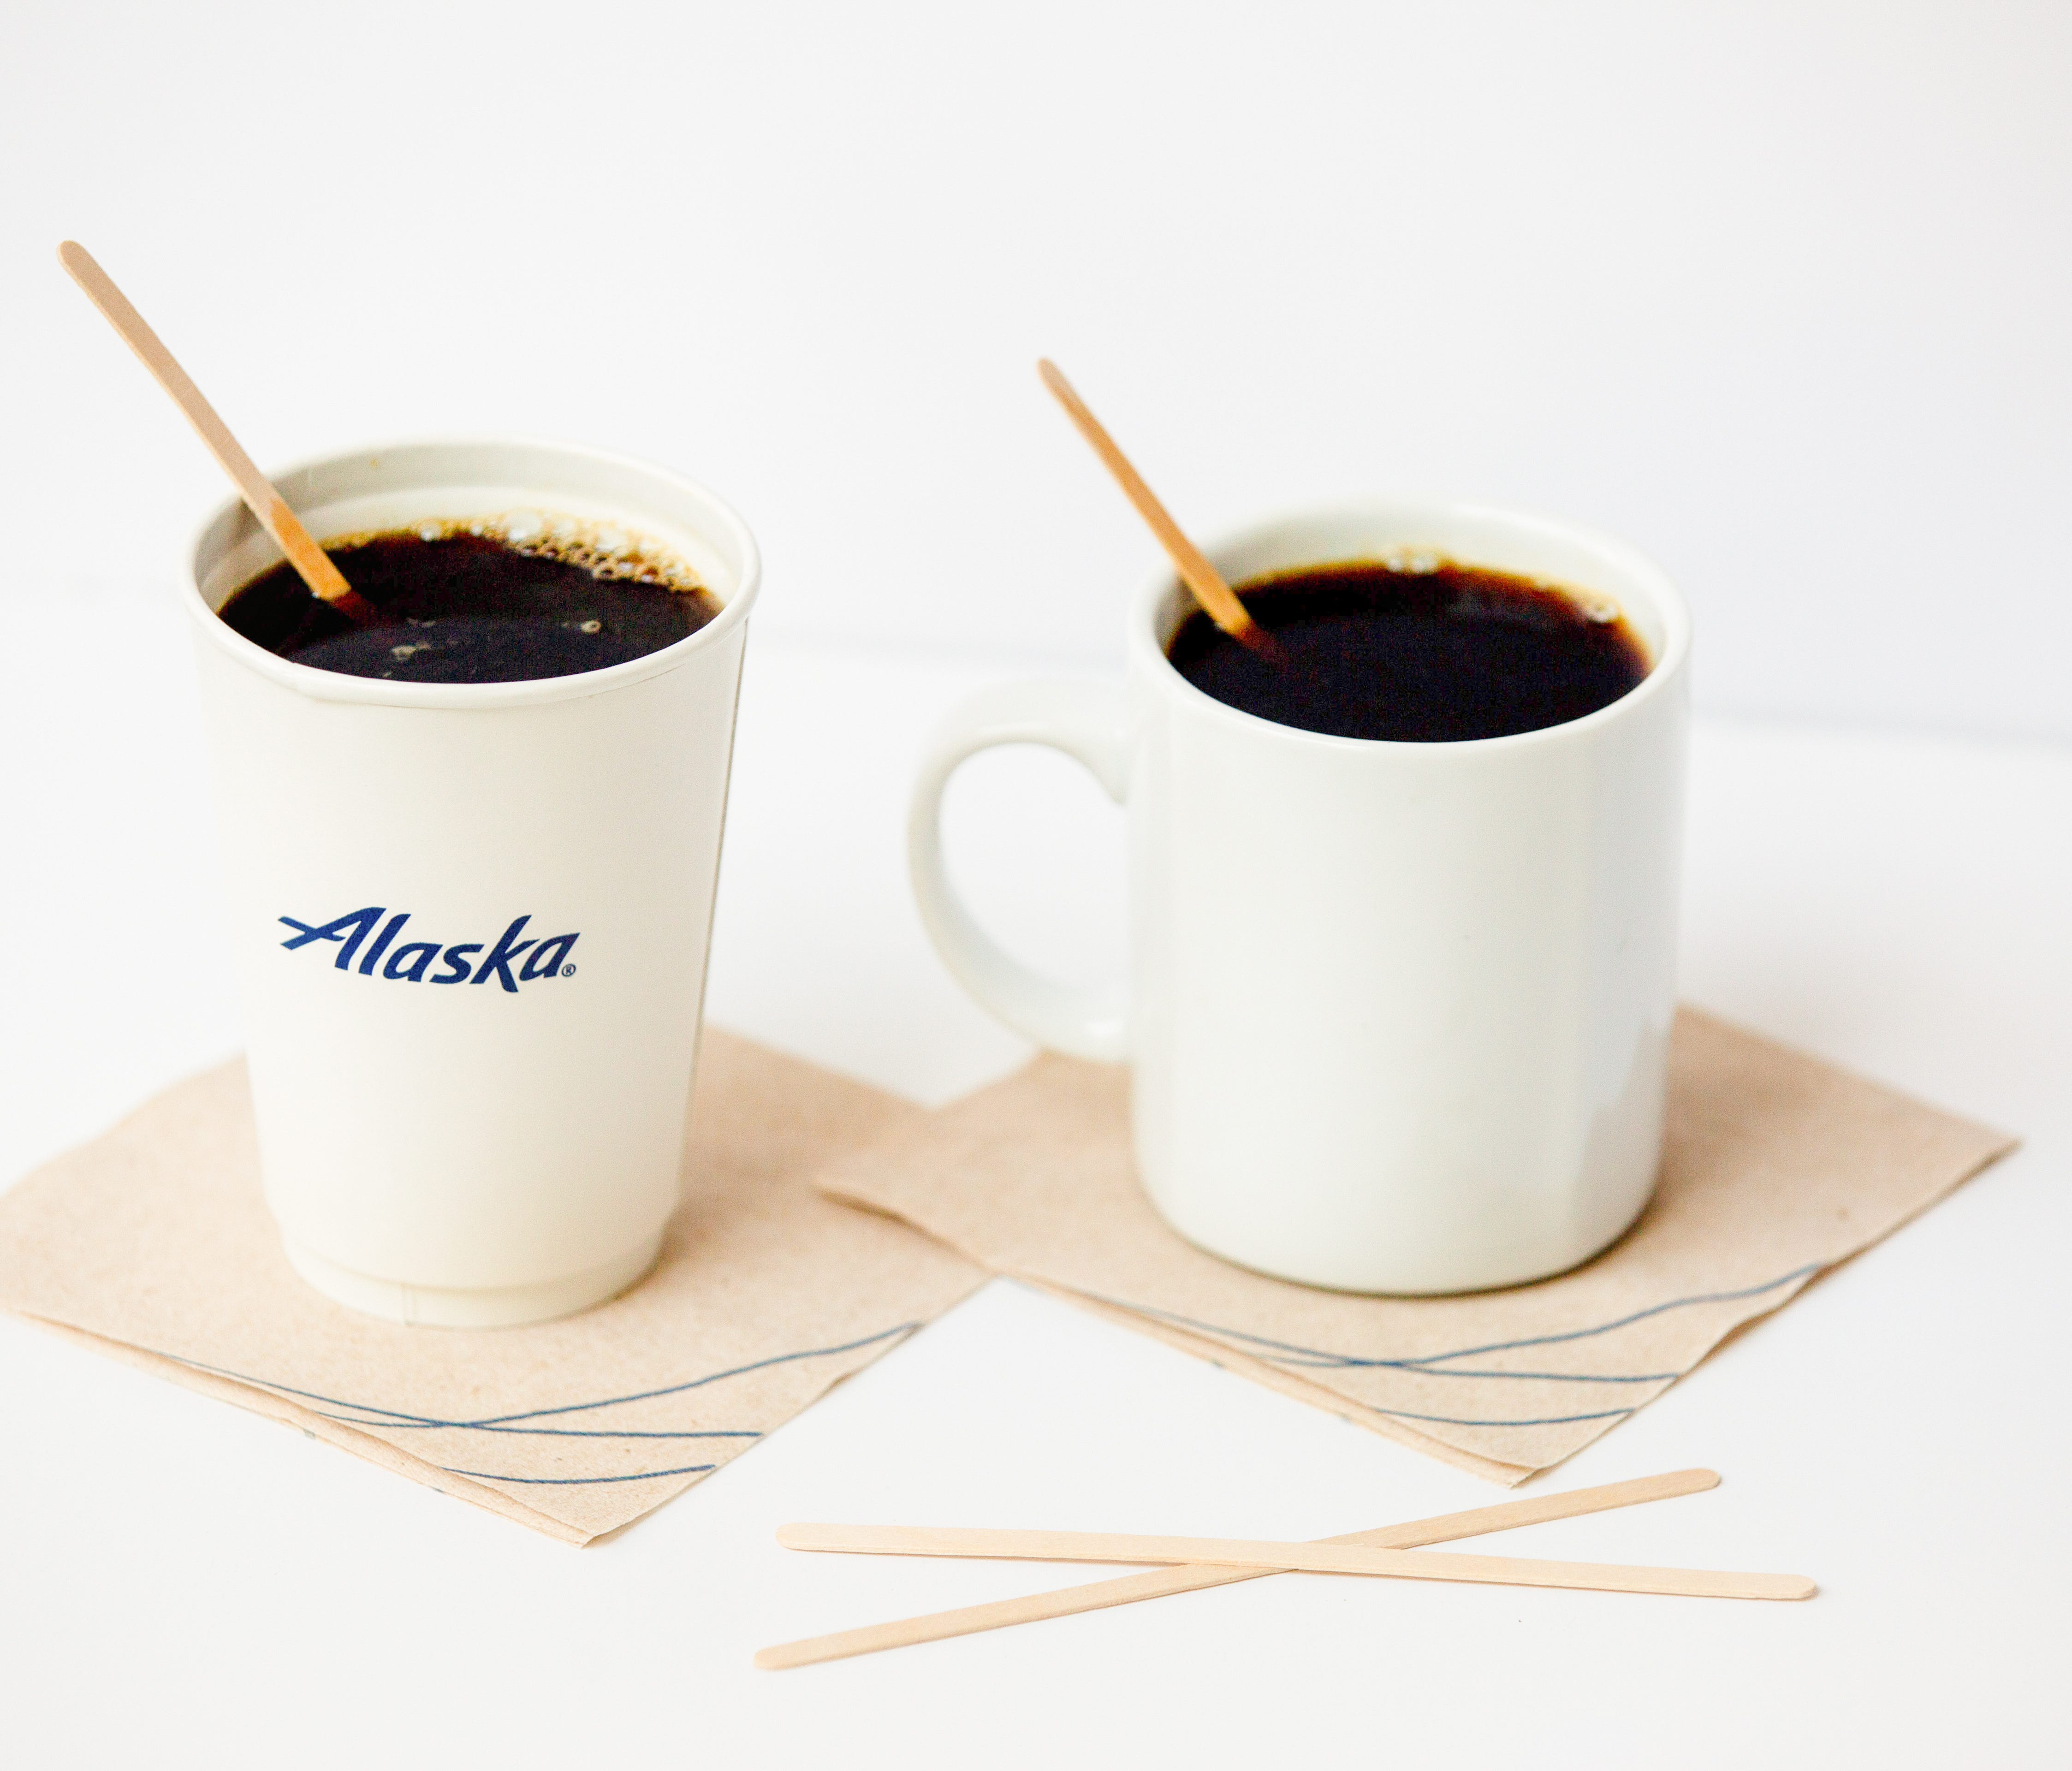 Alaska Airlines will switch from single-use plastic stir sticks to sustainable organic versions starting in July 2018.